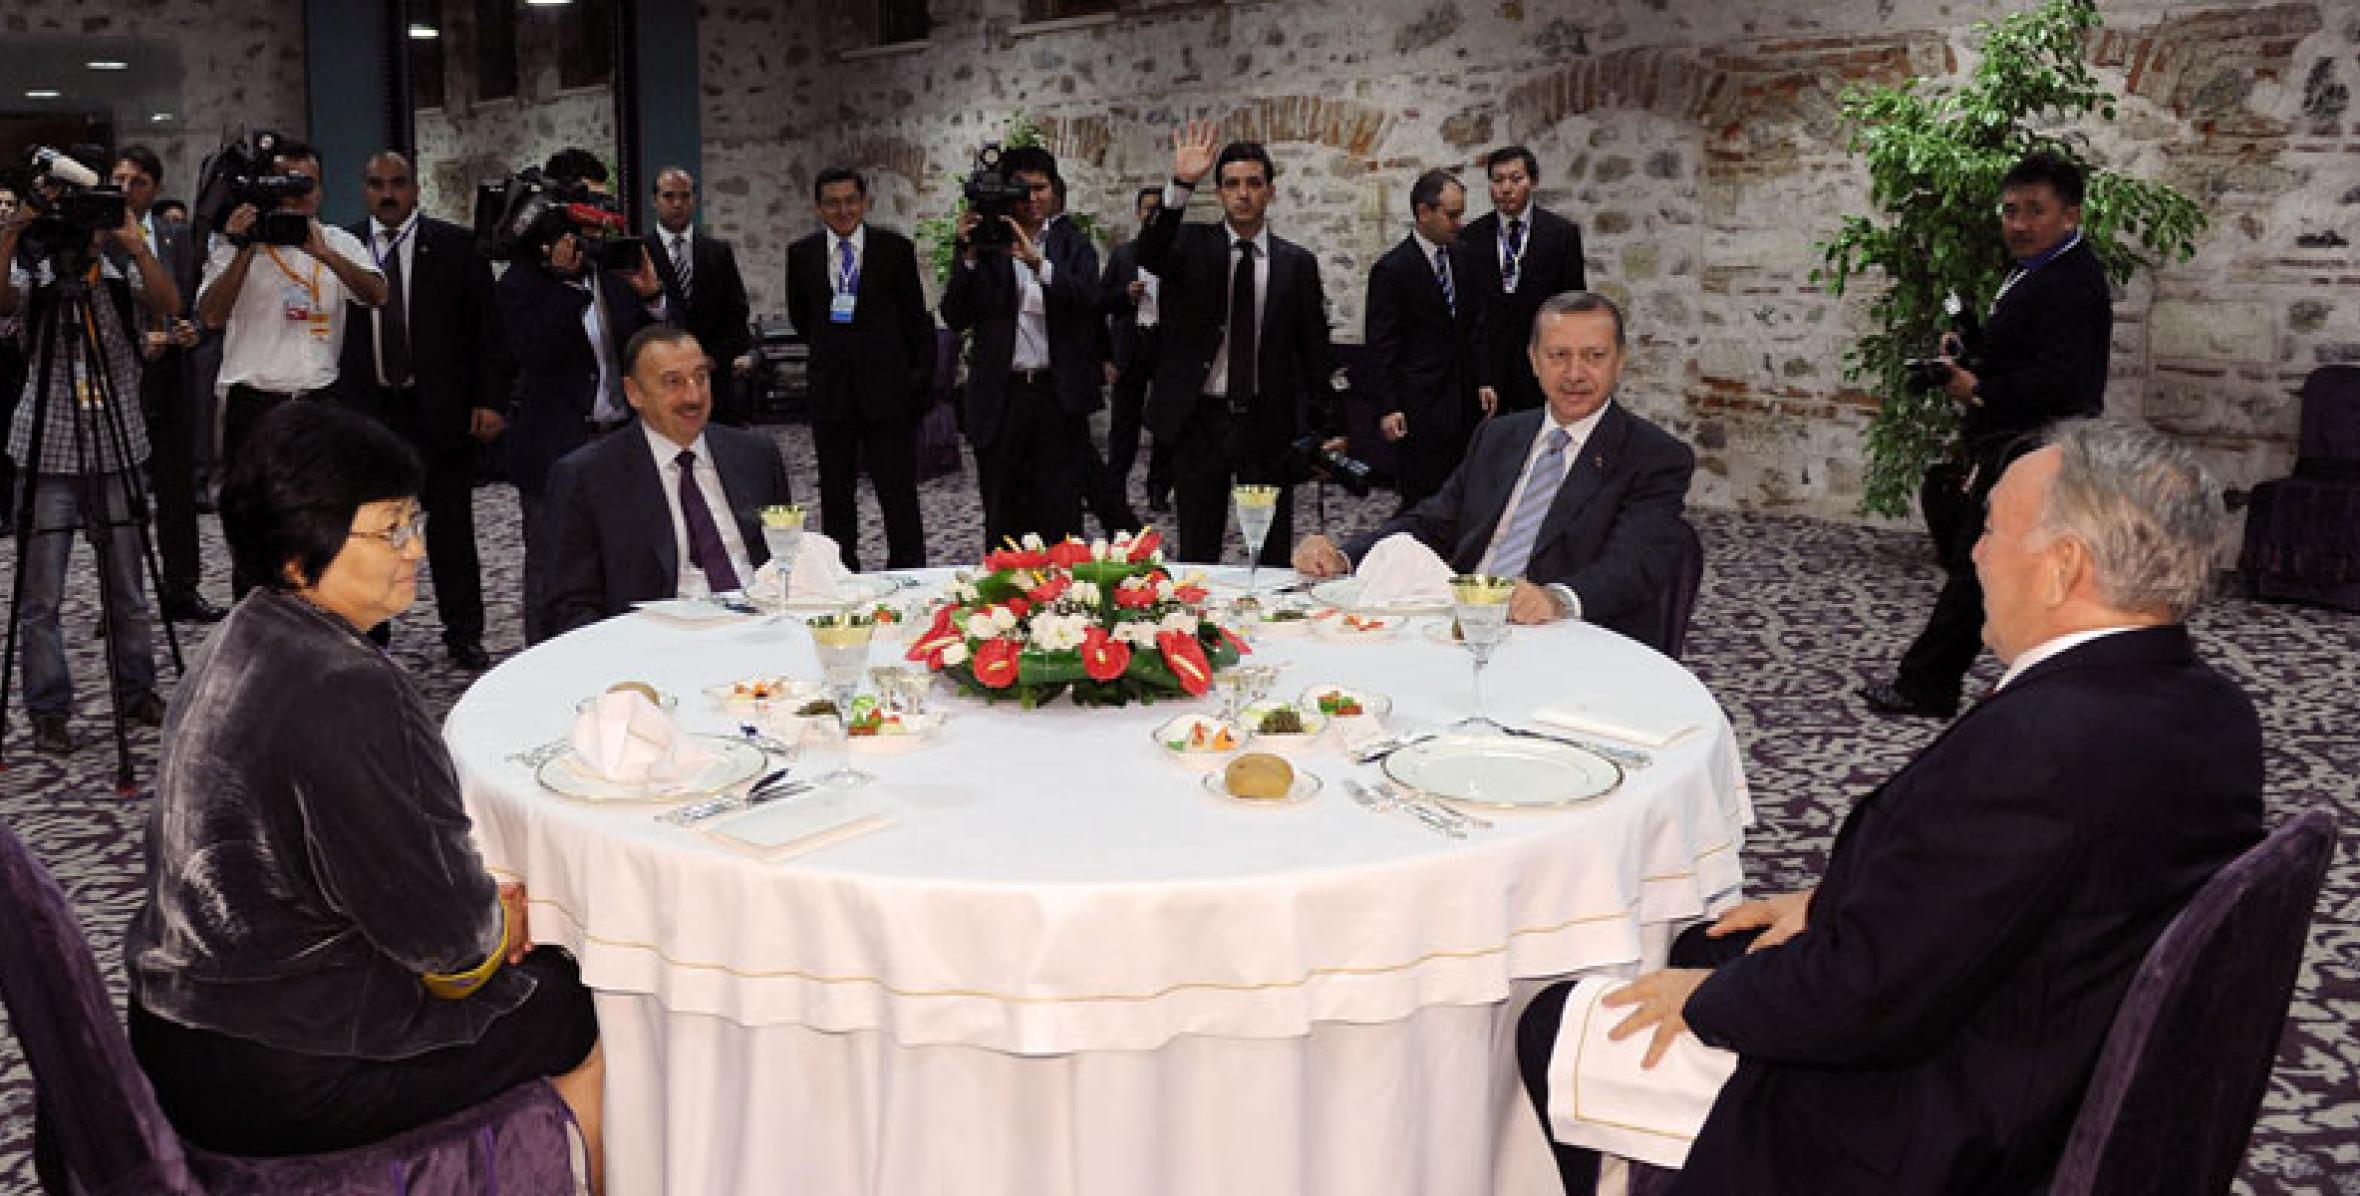 Official dinner was hosted in honor of state leaders in Istanbul